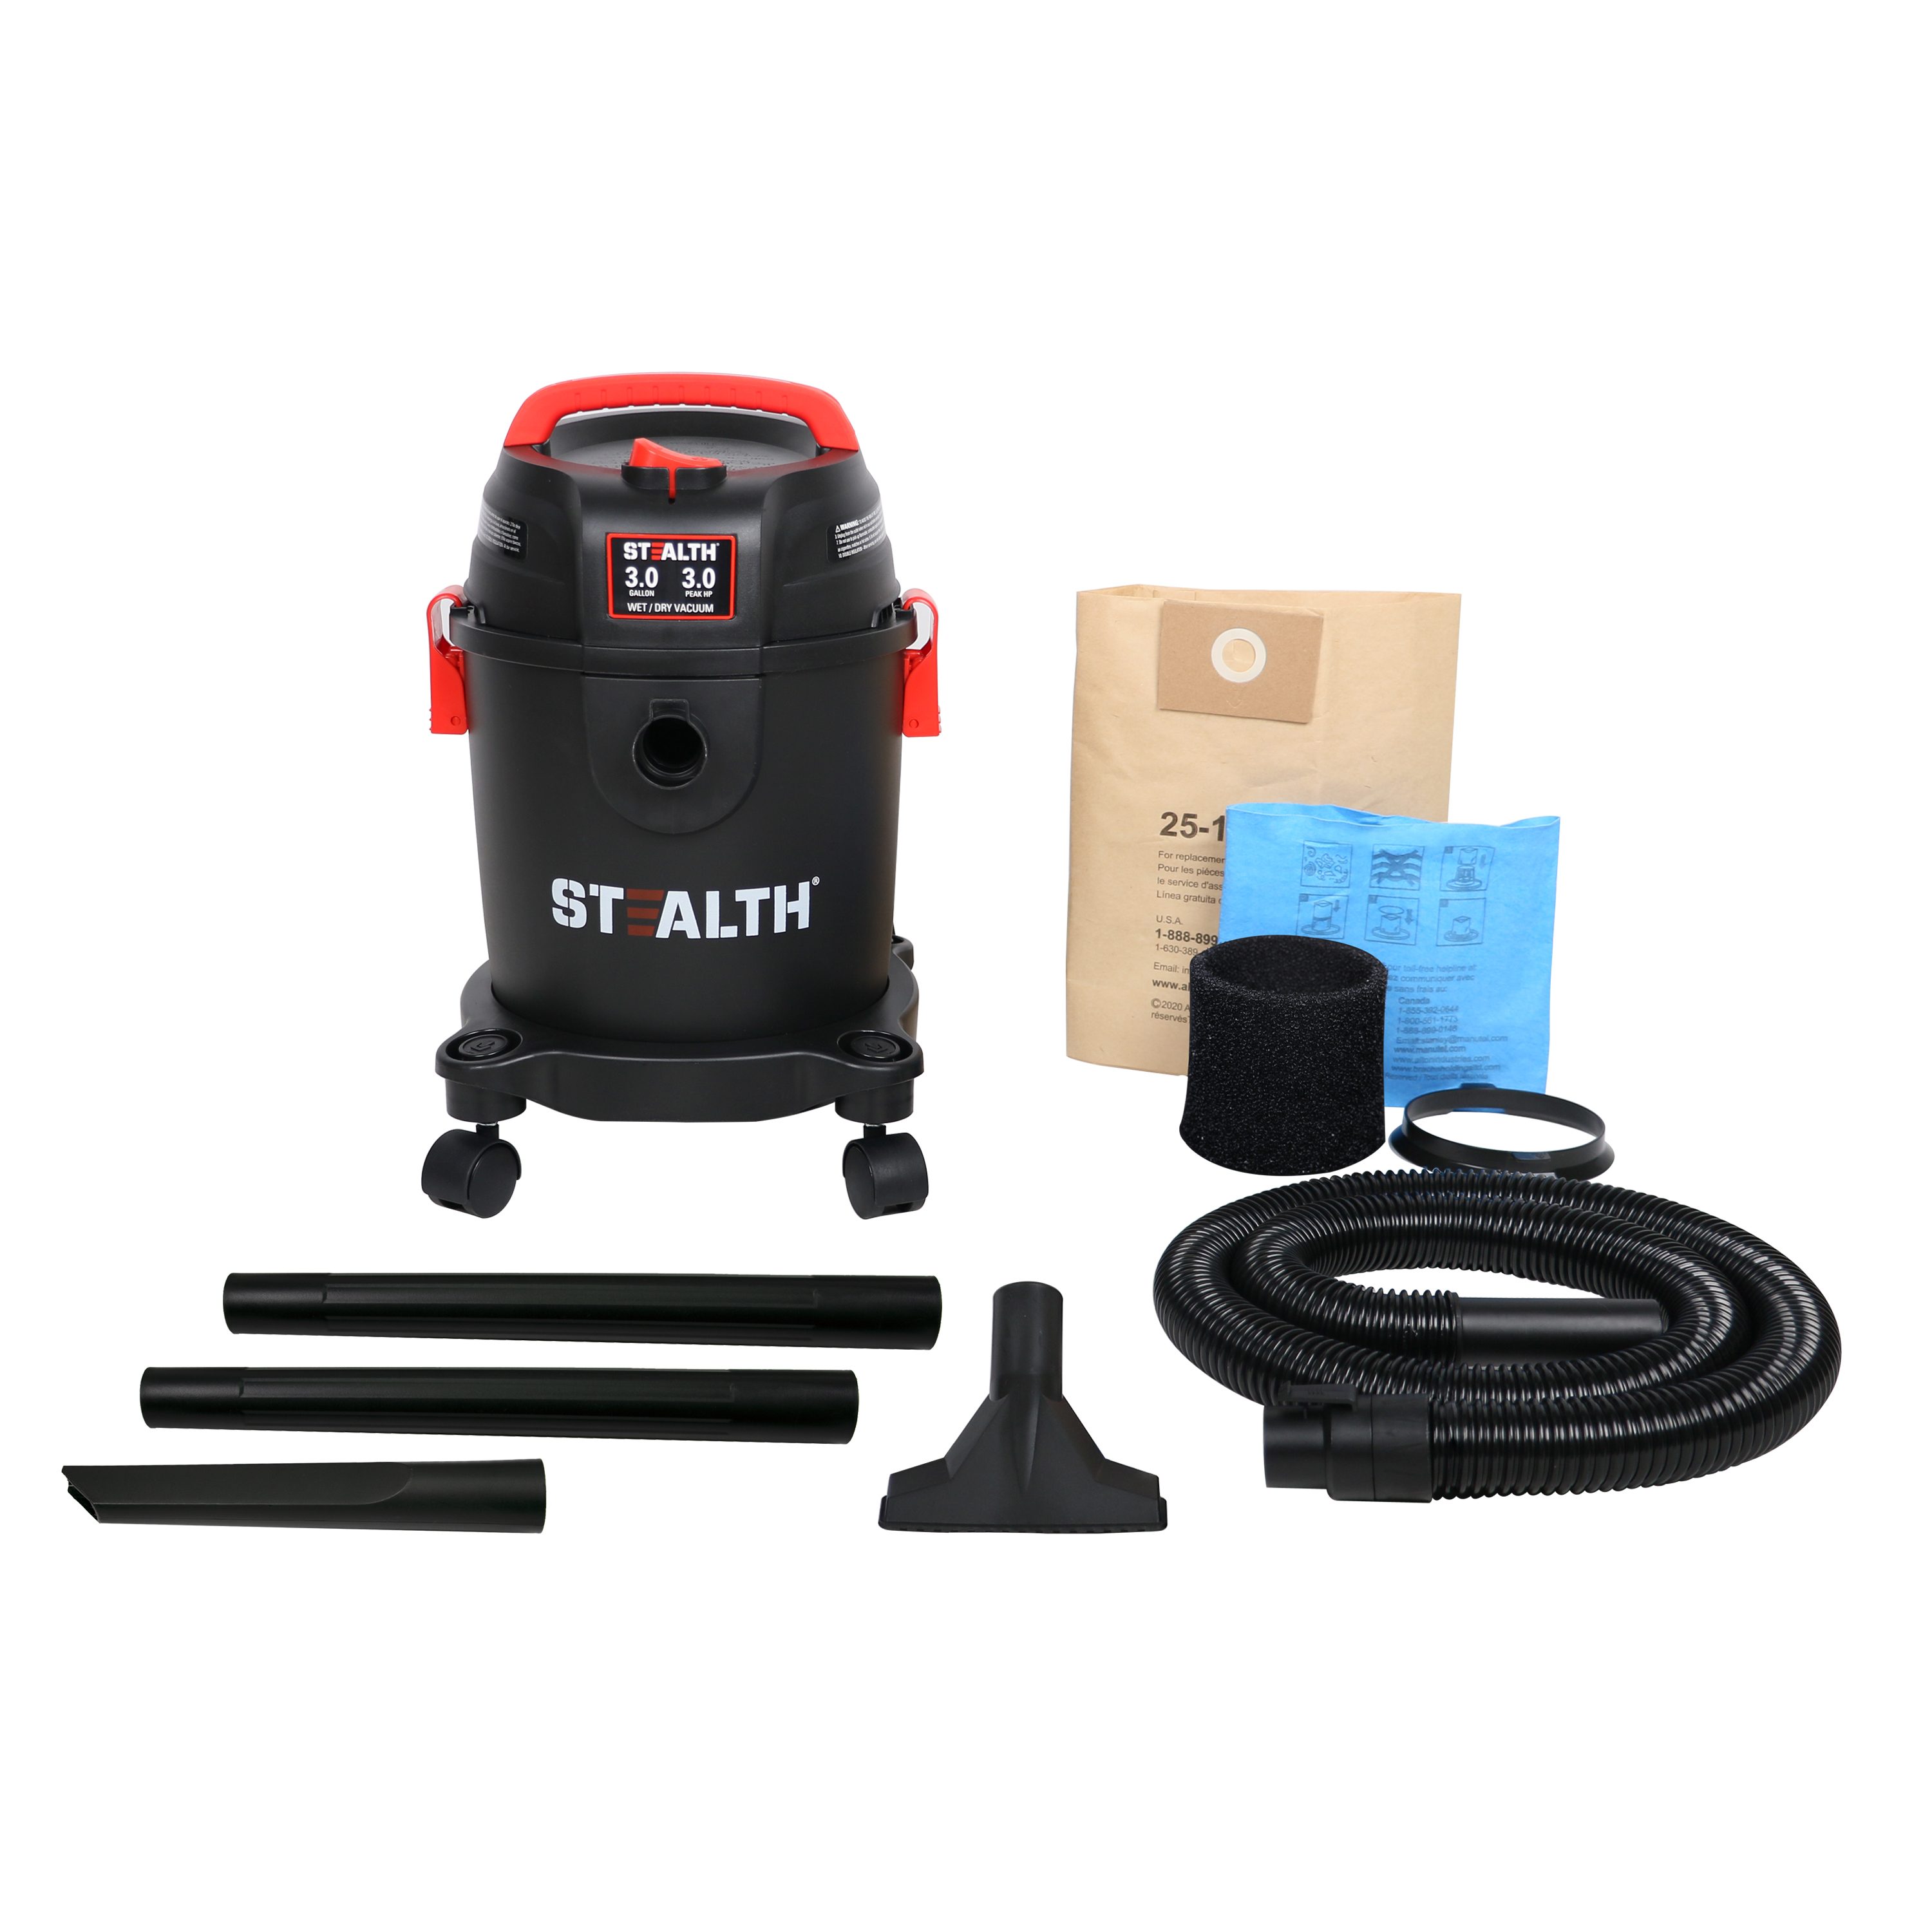 STEALTH 3 Gallon 3 Peak Horsepower Wet Dry Vacuum (AT18202P-3B) with Swiveling Casters - image 2 of 5